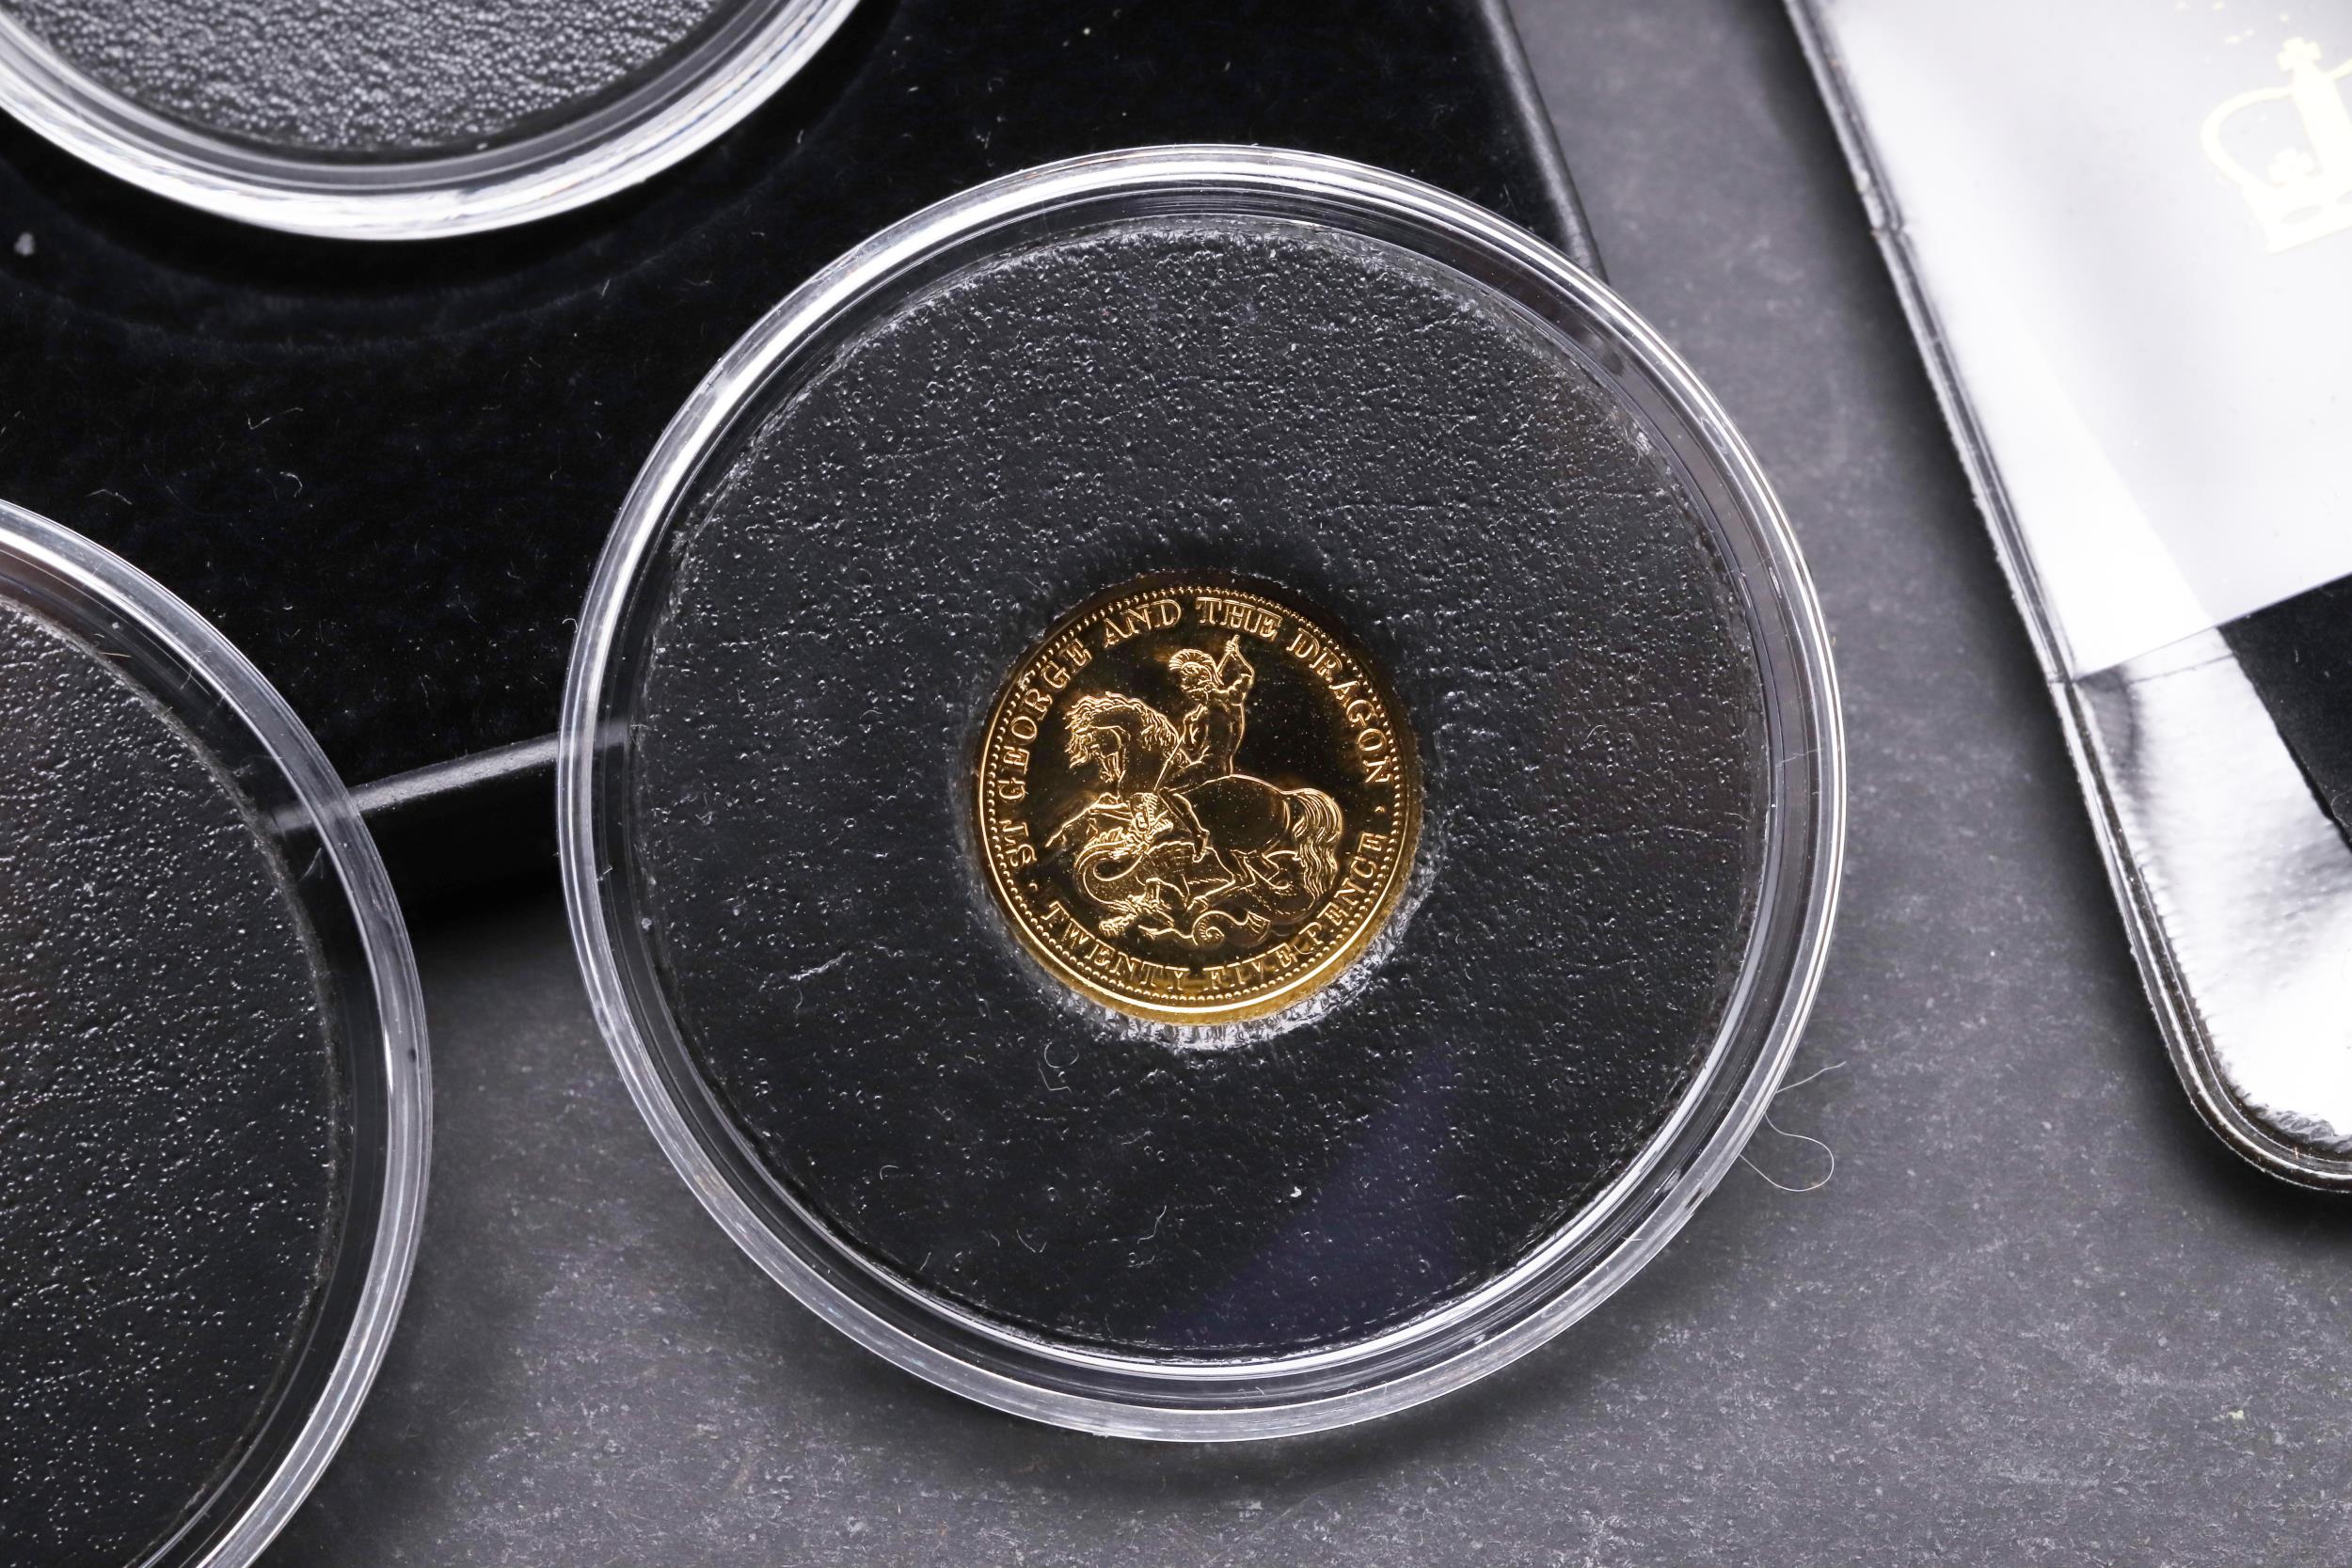 AN ELIZABETH II TRISTAN DA CUNHA GOLD CROWN AND TWO SIMILAR GOLD COINS. 2013. - Image 8 of 8